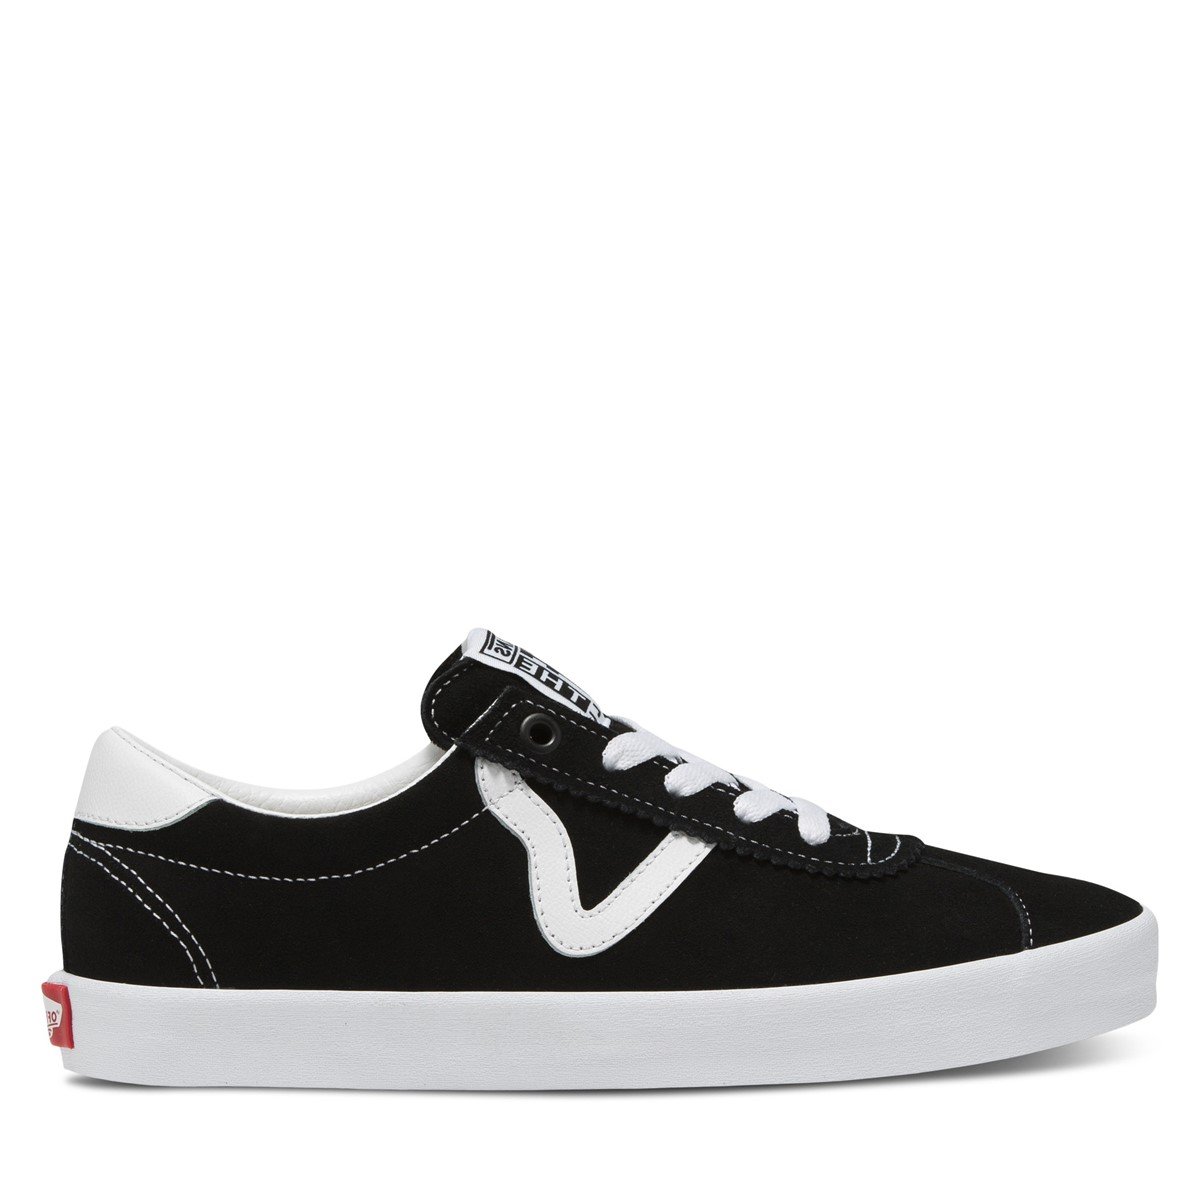 Sports Low Sneakers in Black/White